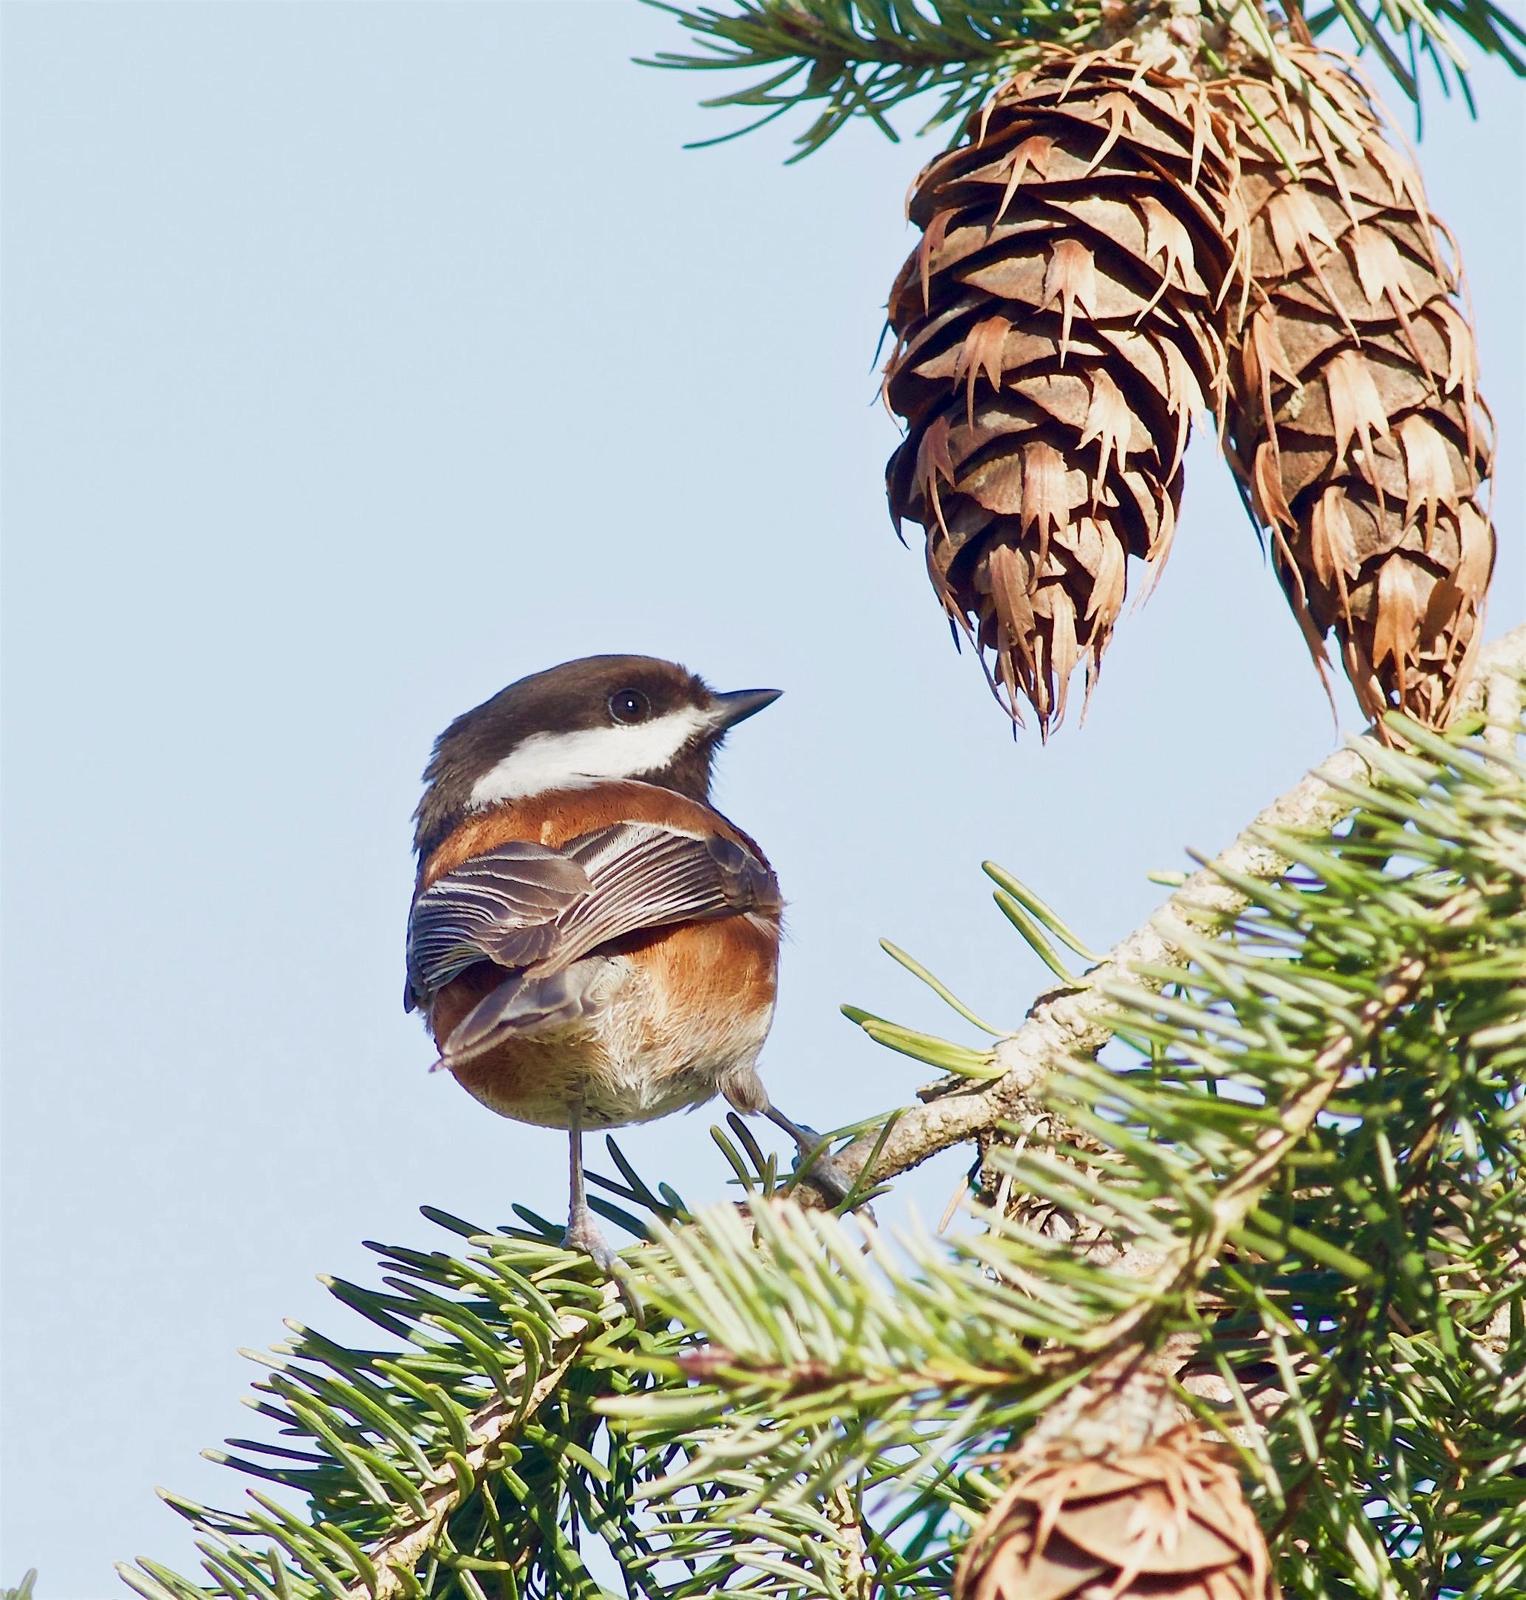 Chestnut-backed Chickadee Photo by Kathryn Keith